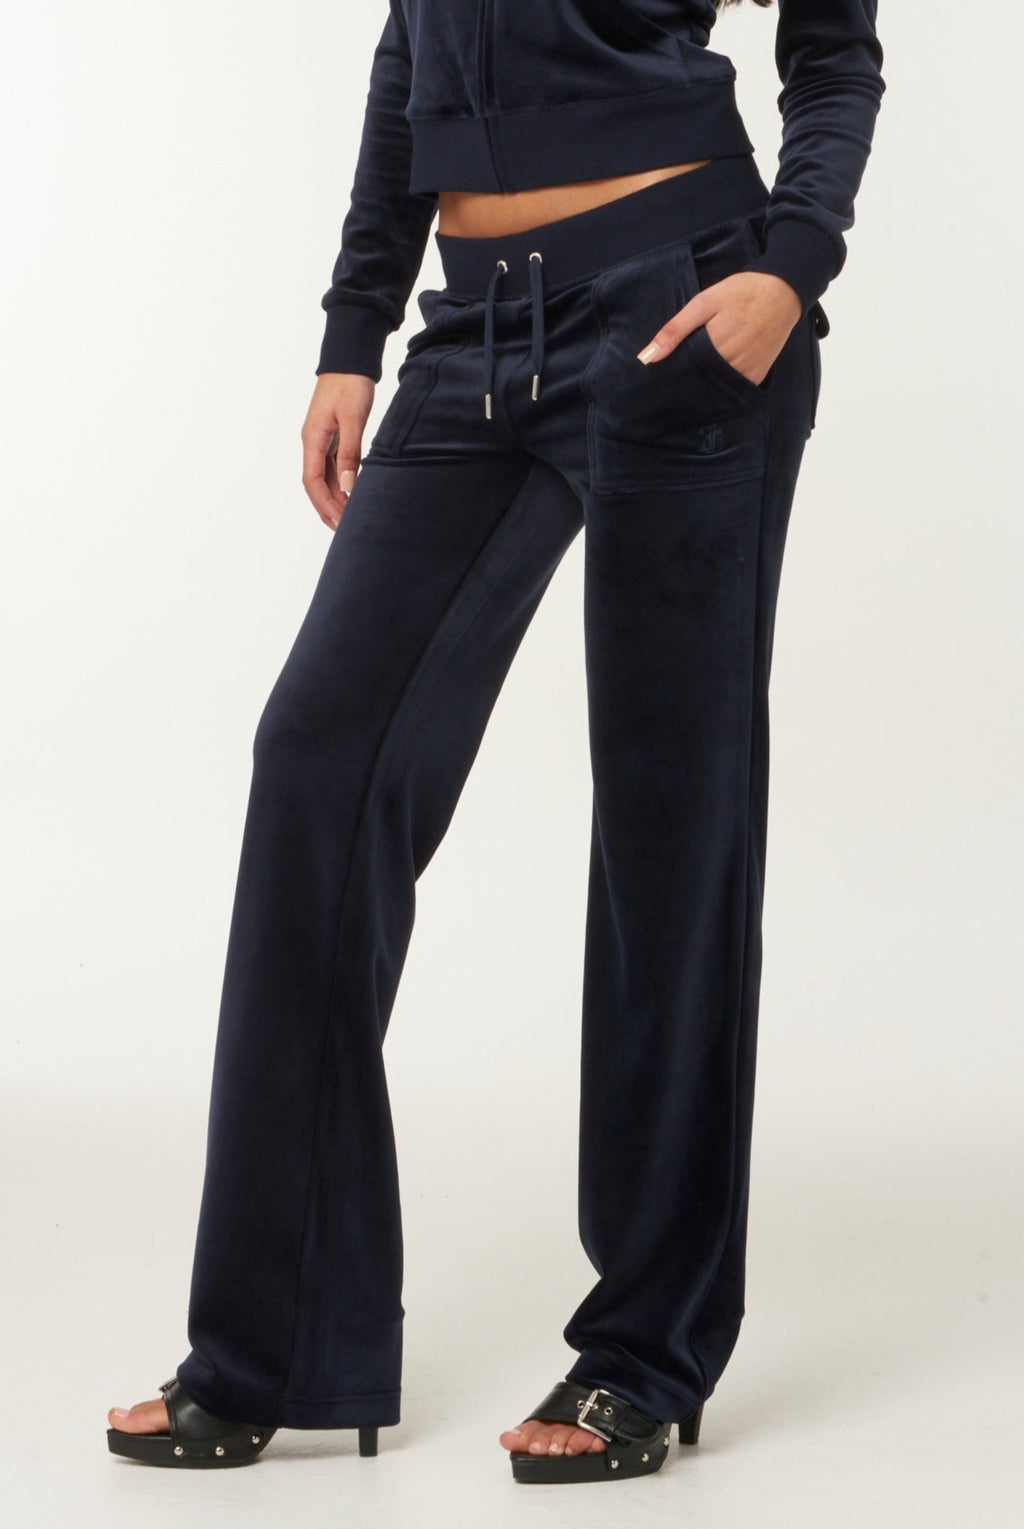 NIGHT SKY BLUE CLASSIC VELOUR DEL RAY POCKETED BOTTOMS